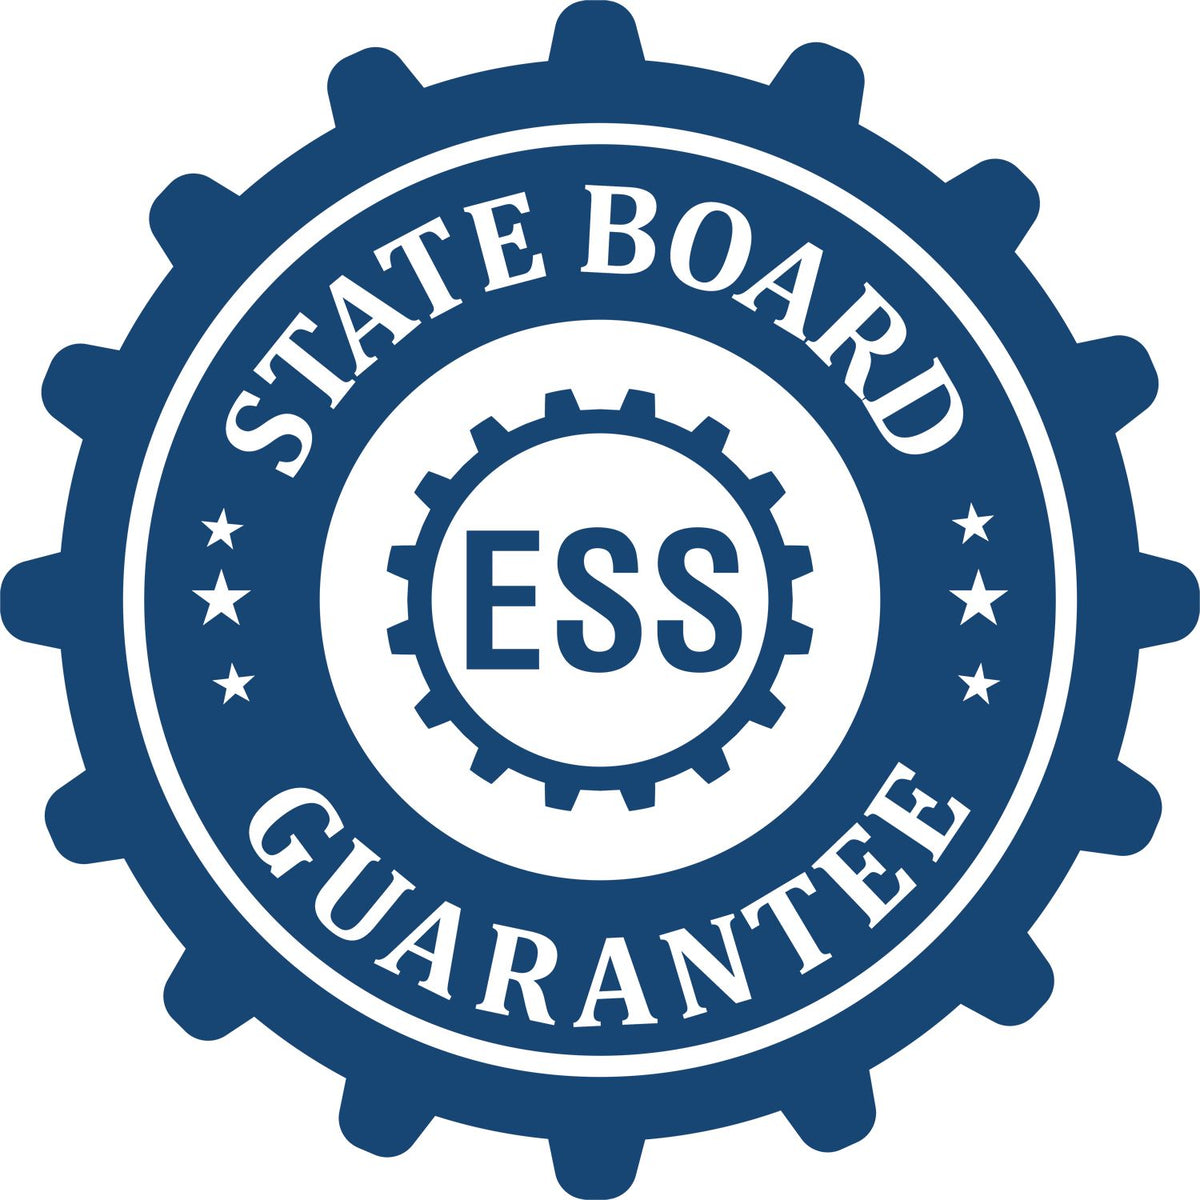 An emblem in a gear shape illustrating a state board guarantee for the Digital Kansas PE Stamp and Electronic Seal for Kansas Engineer product.